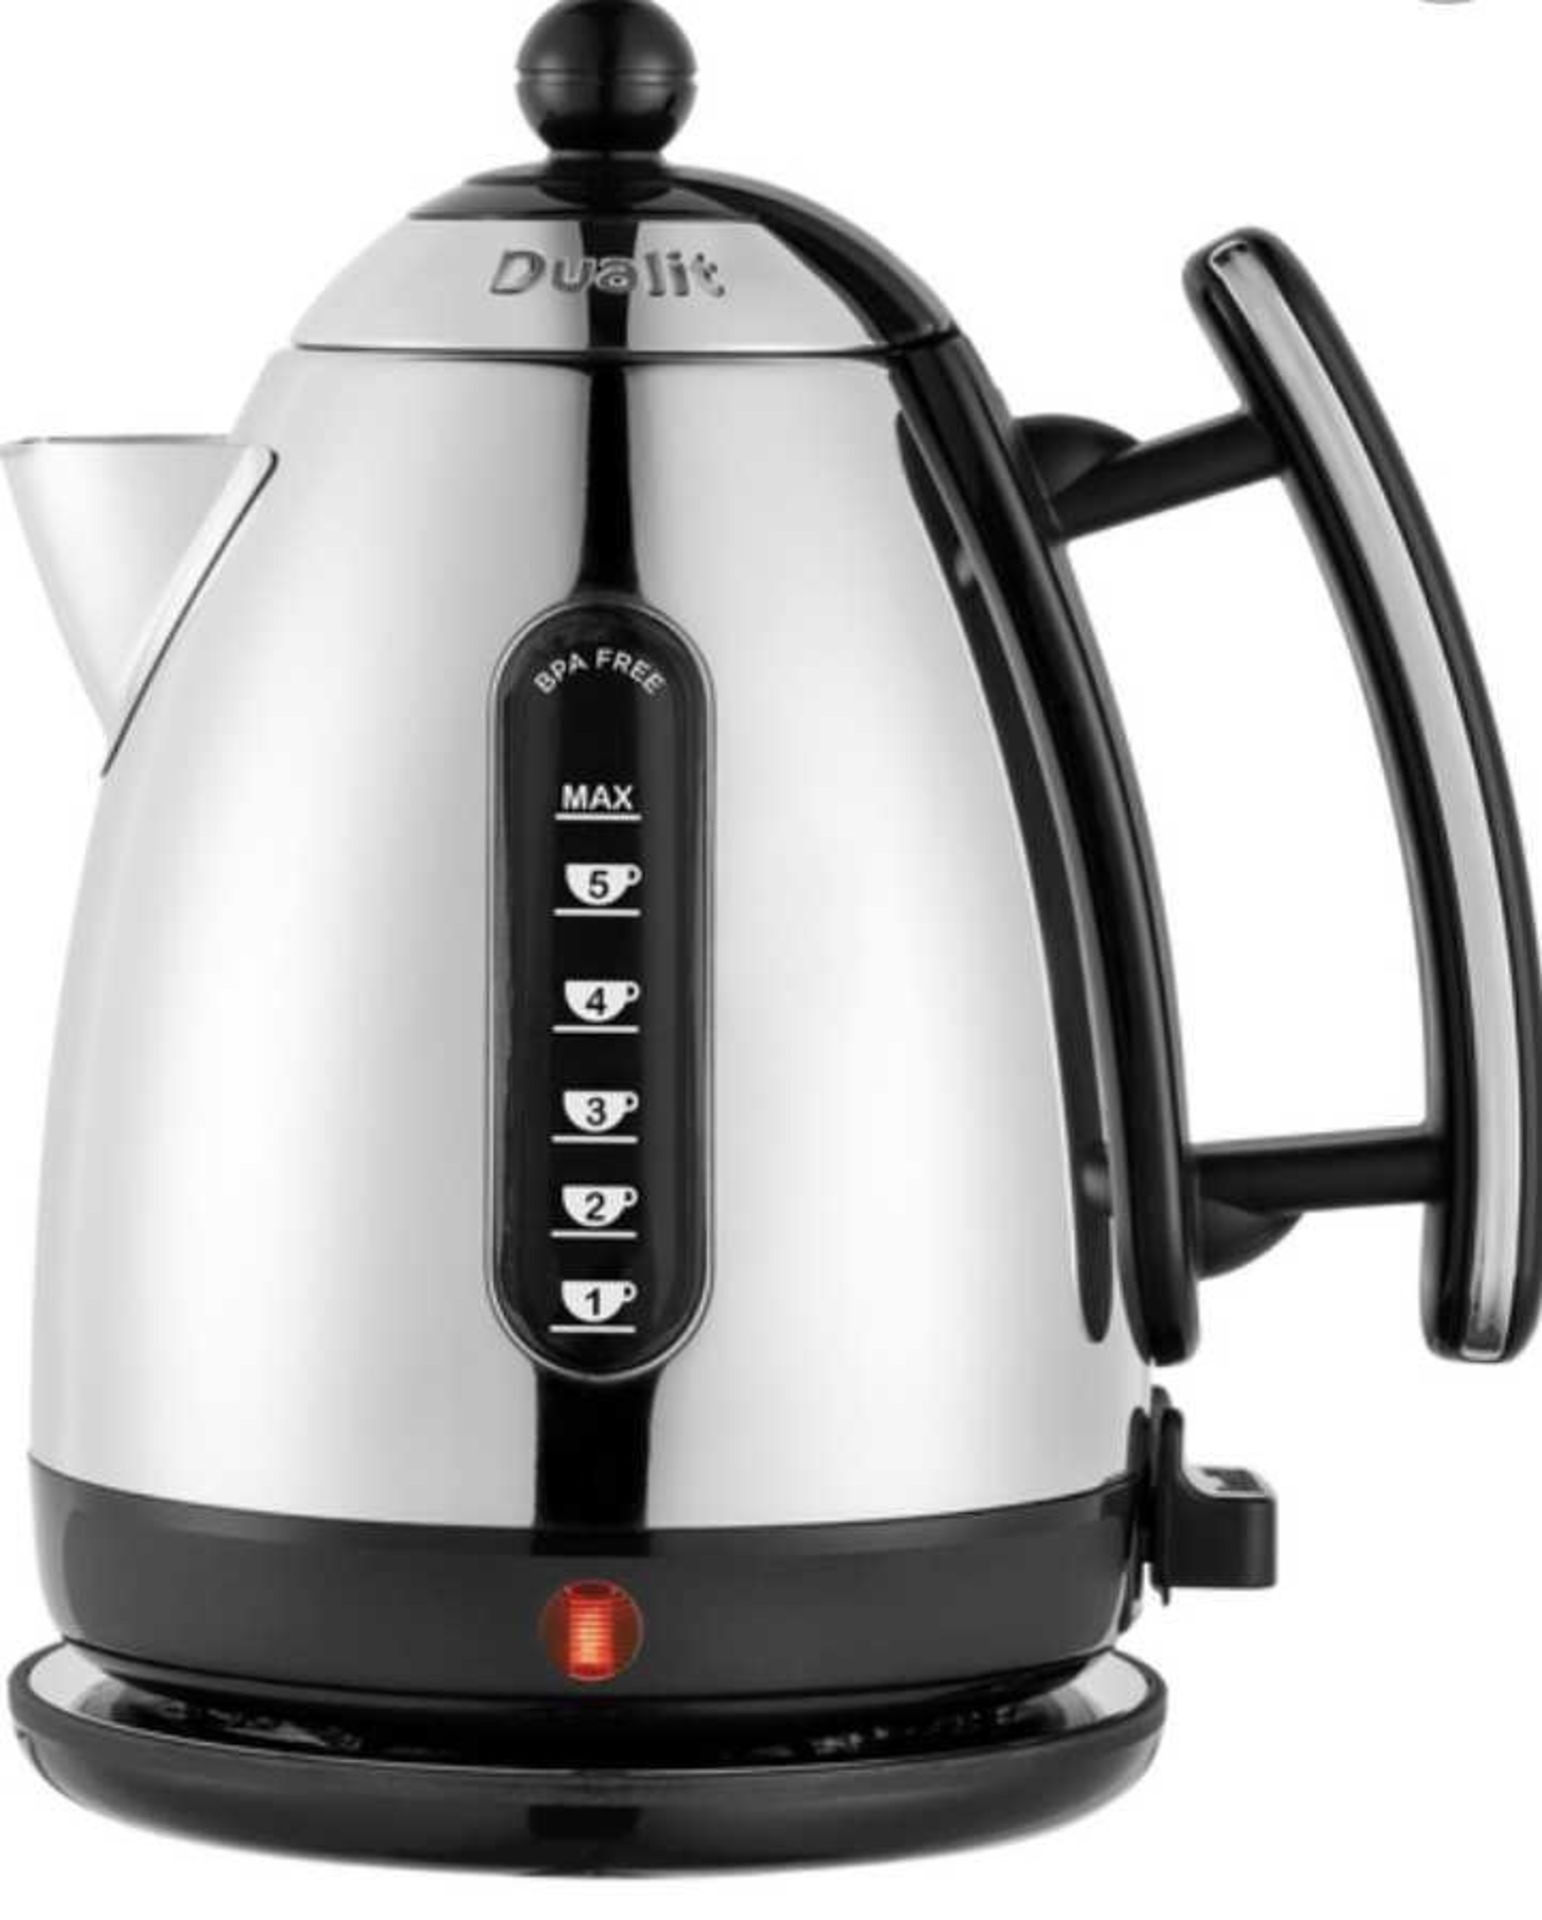 RRP £150 Lot To Contain X3 Kettles, Breville Grey Kettle, Dulit 1.0L Jug Kettle,Morphy Richards Hive